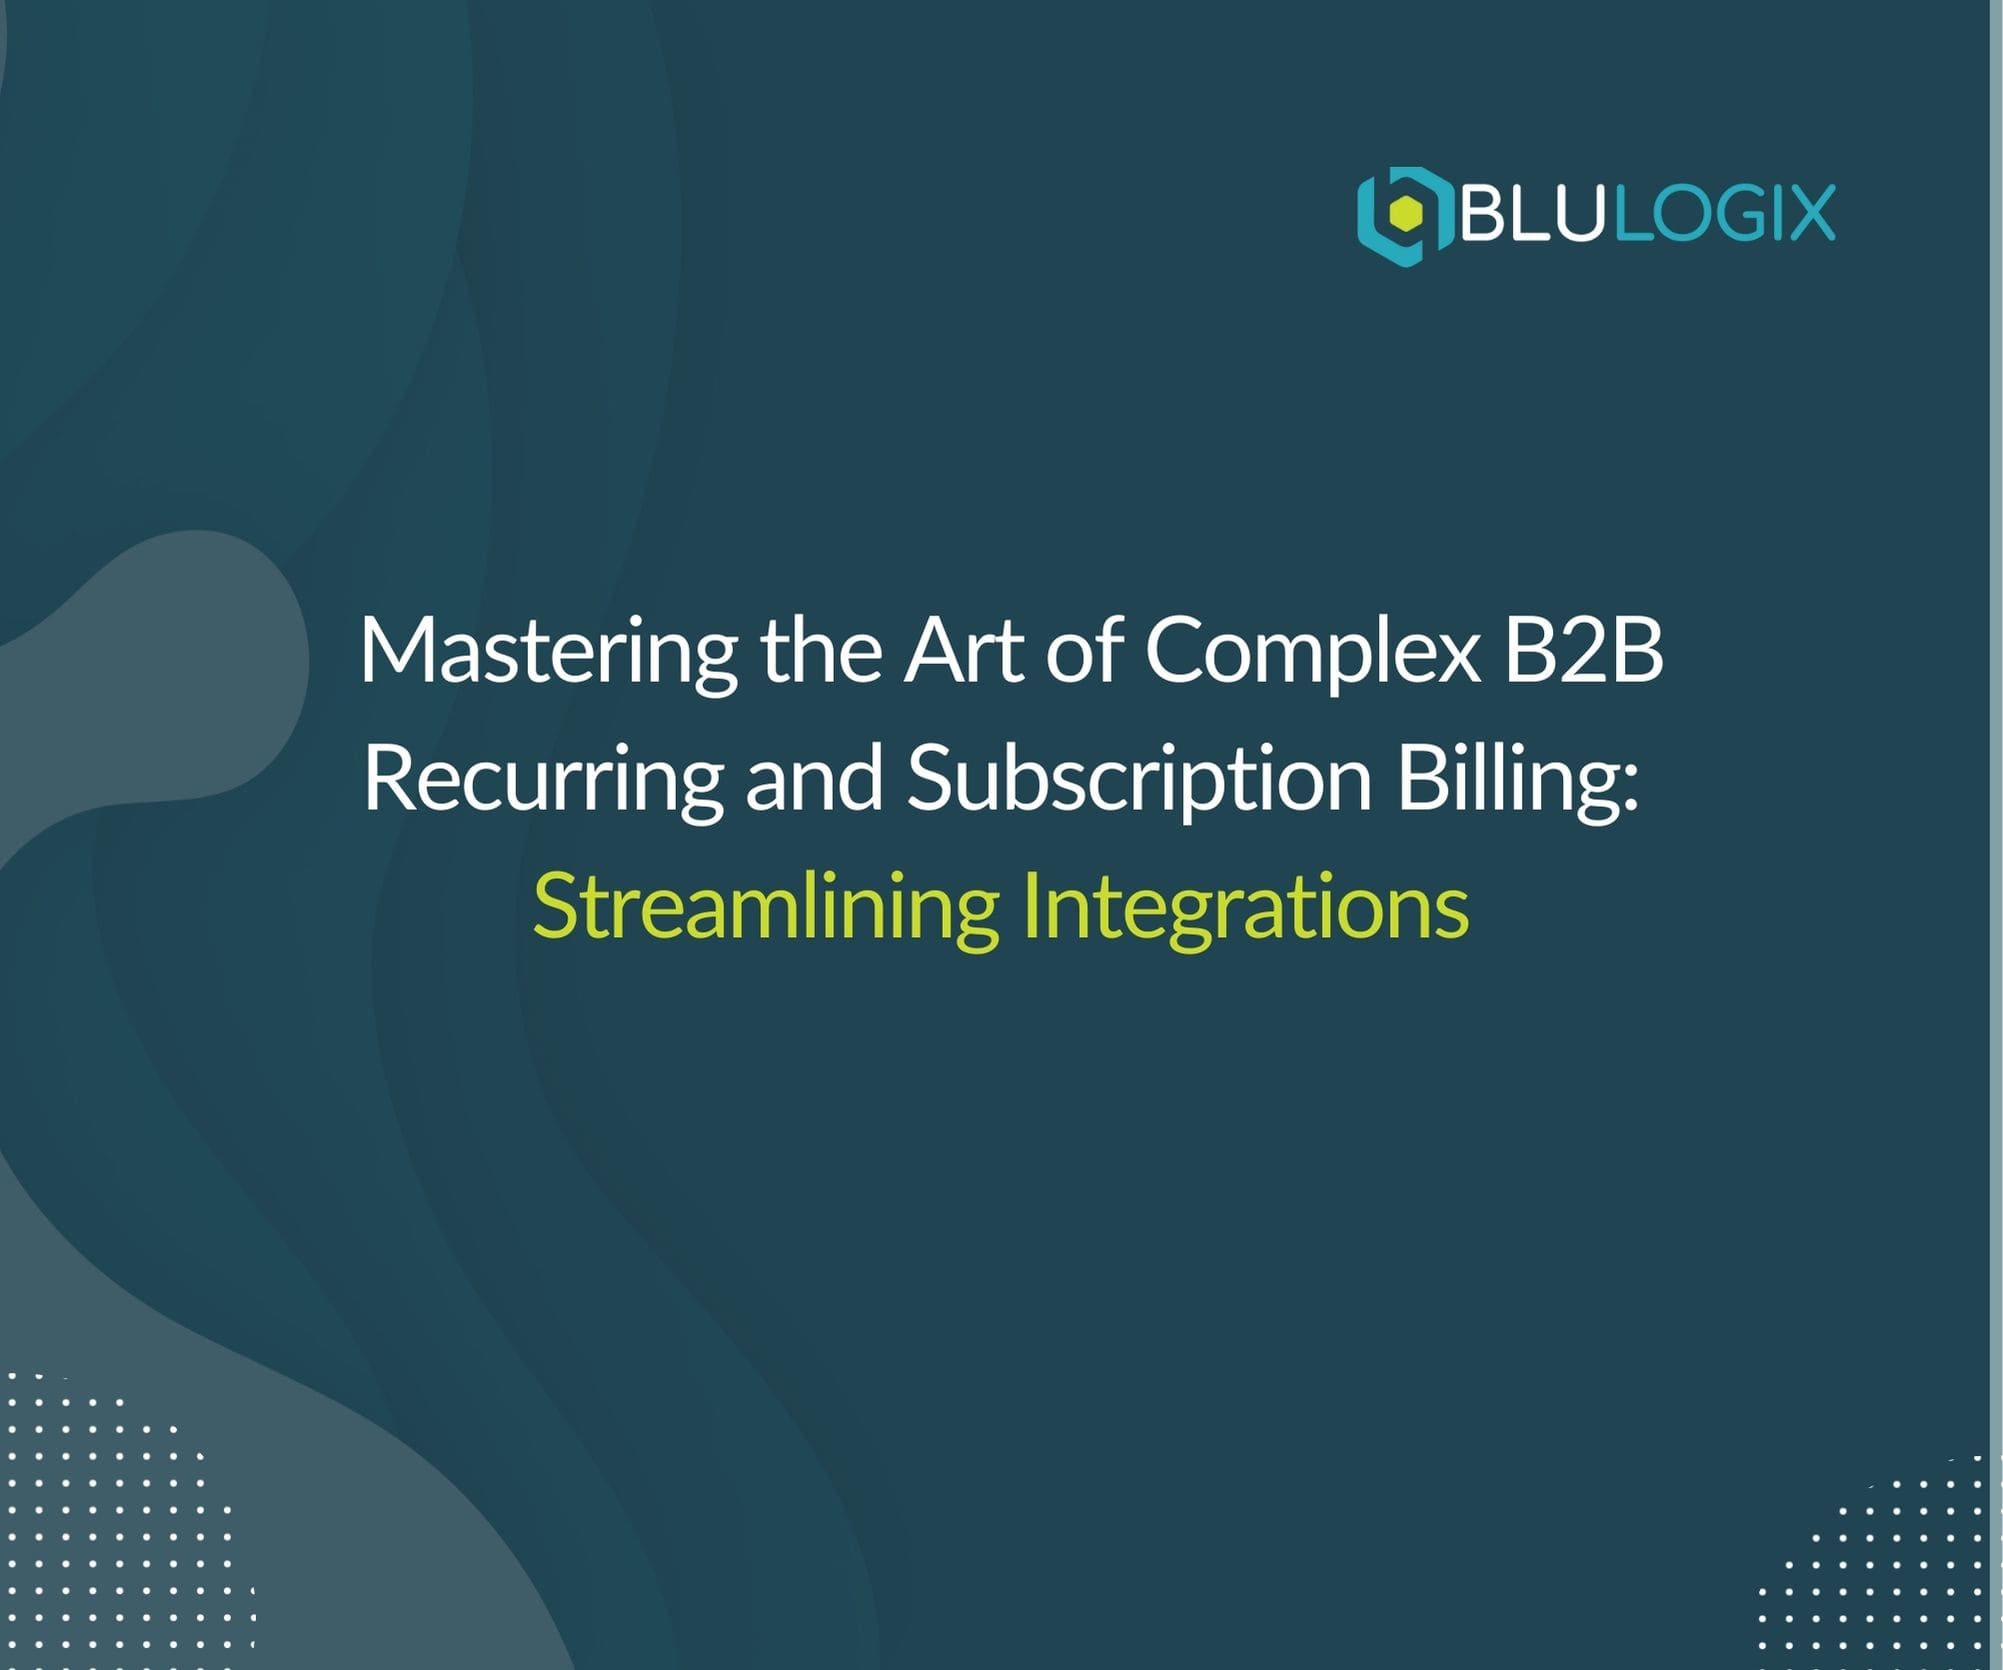 Mastering the Art of Complex B2B Recurring and Subscription Billing Streamlining Integrations